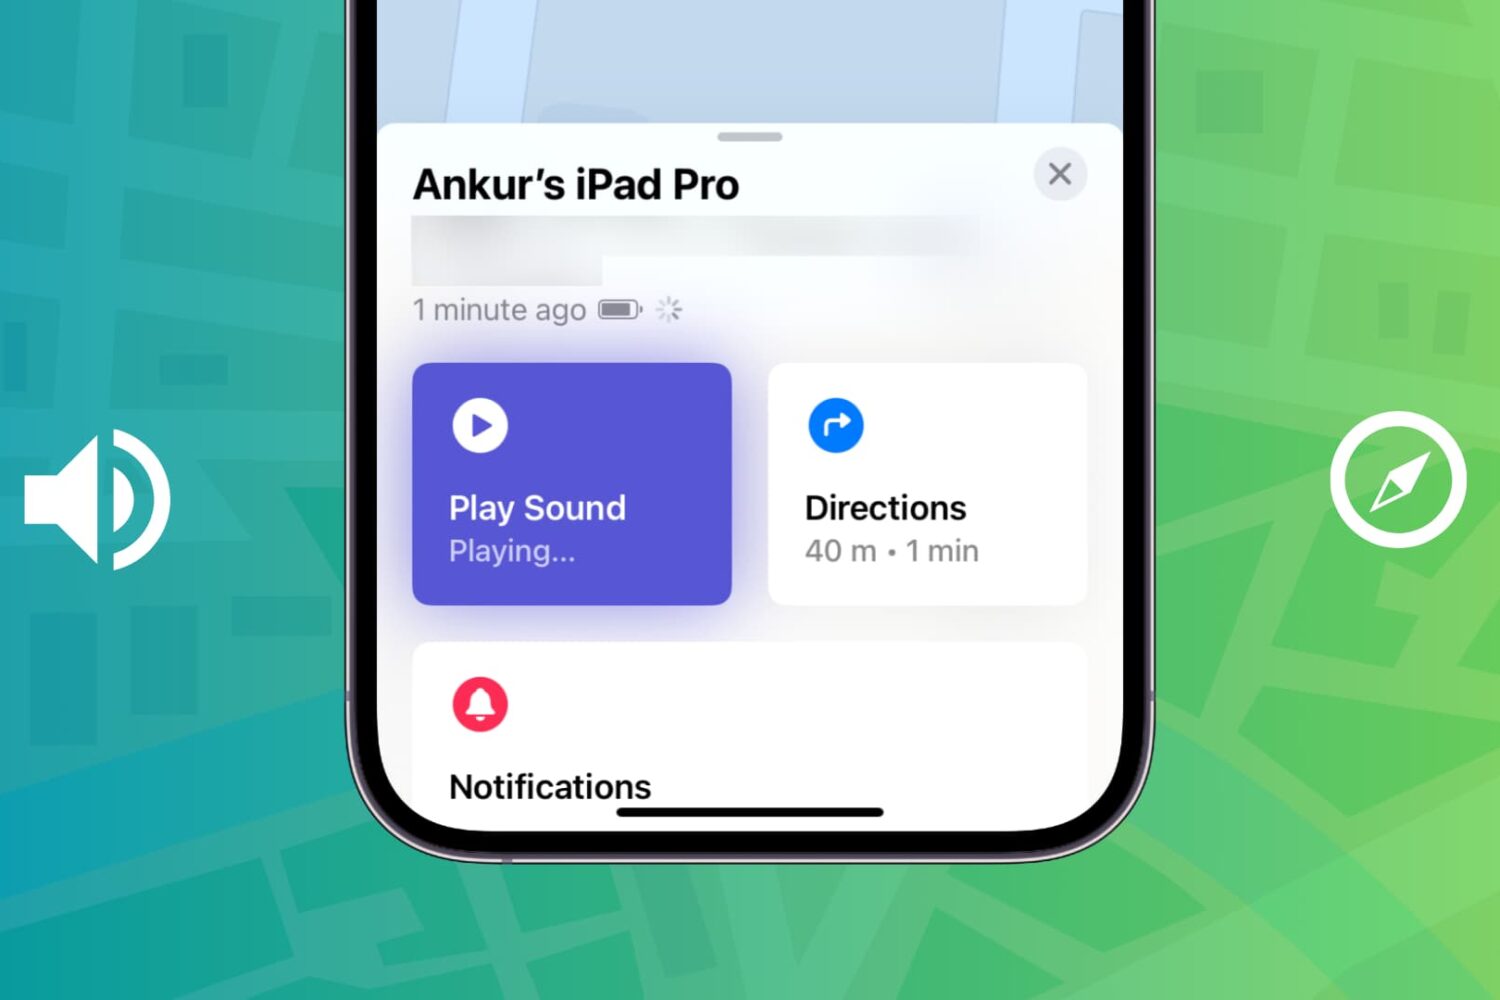 Play sound and get directions to track and recover your lost iPhone